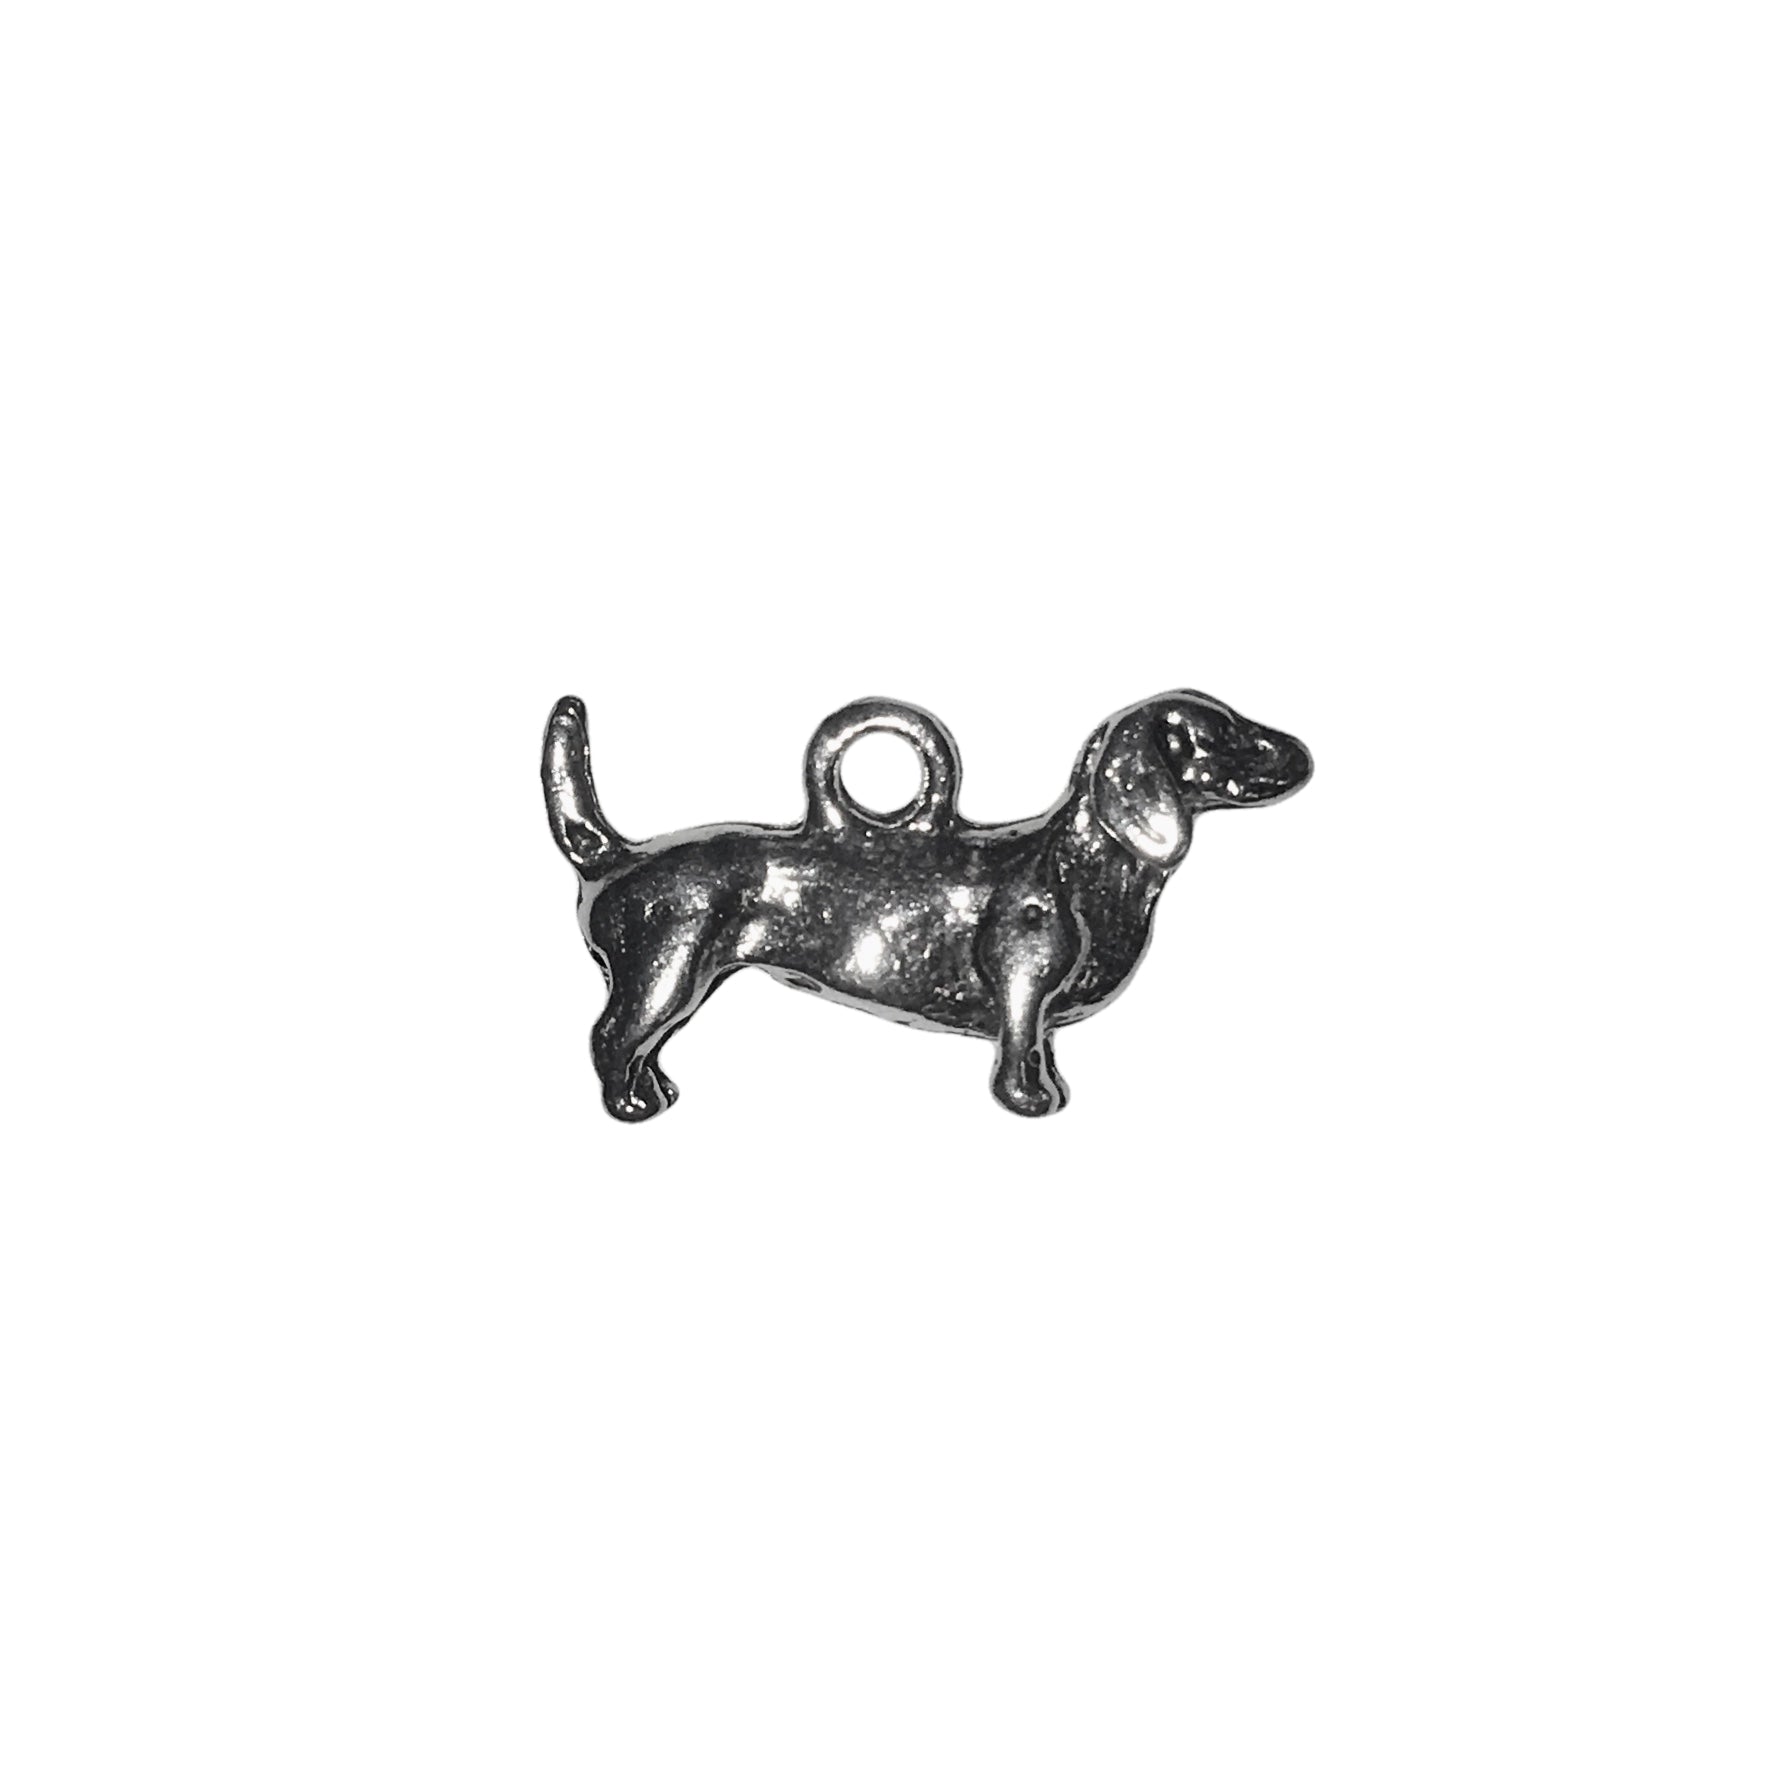 Daschund Charms - Qty 5 - Lead Free Pewter Silver - American Made